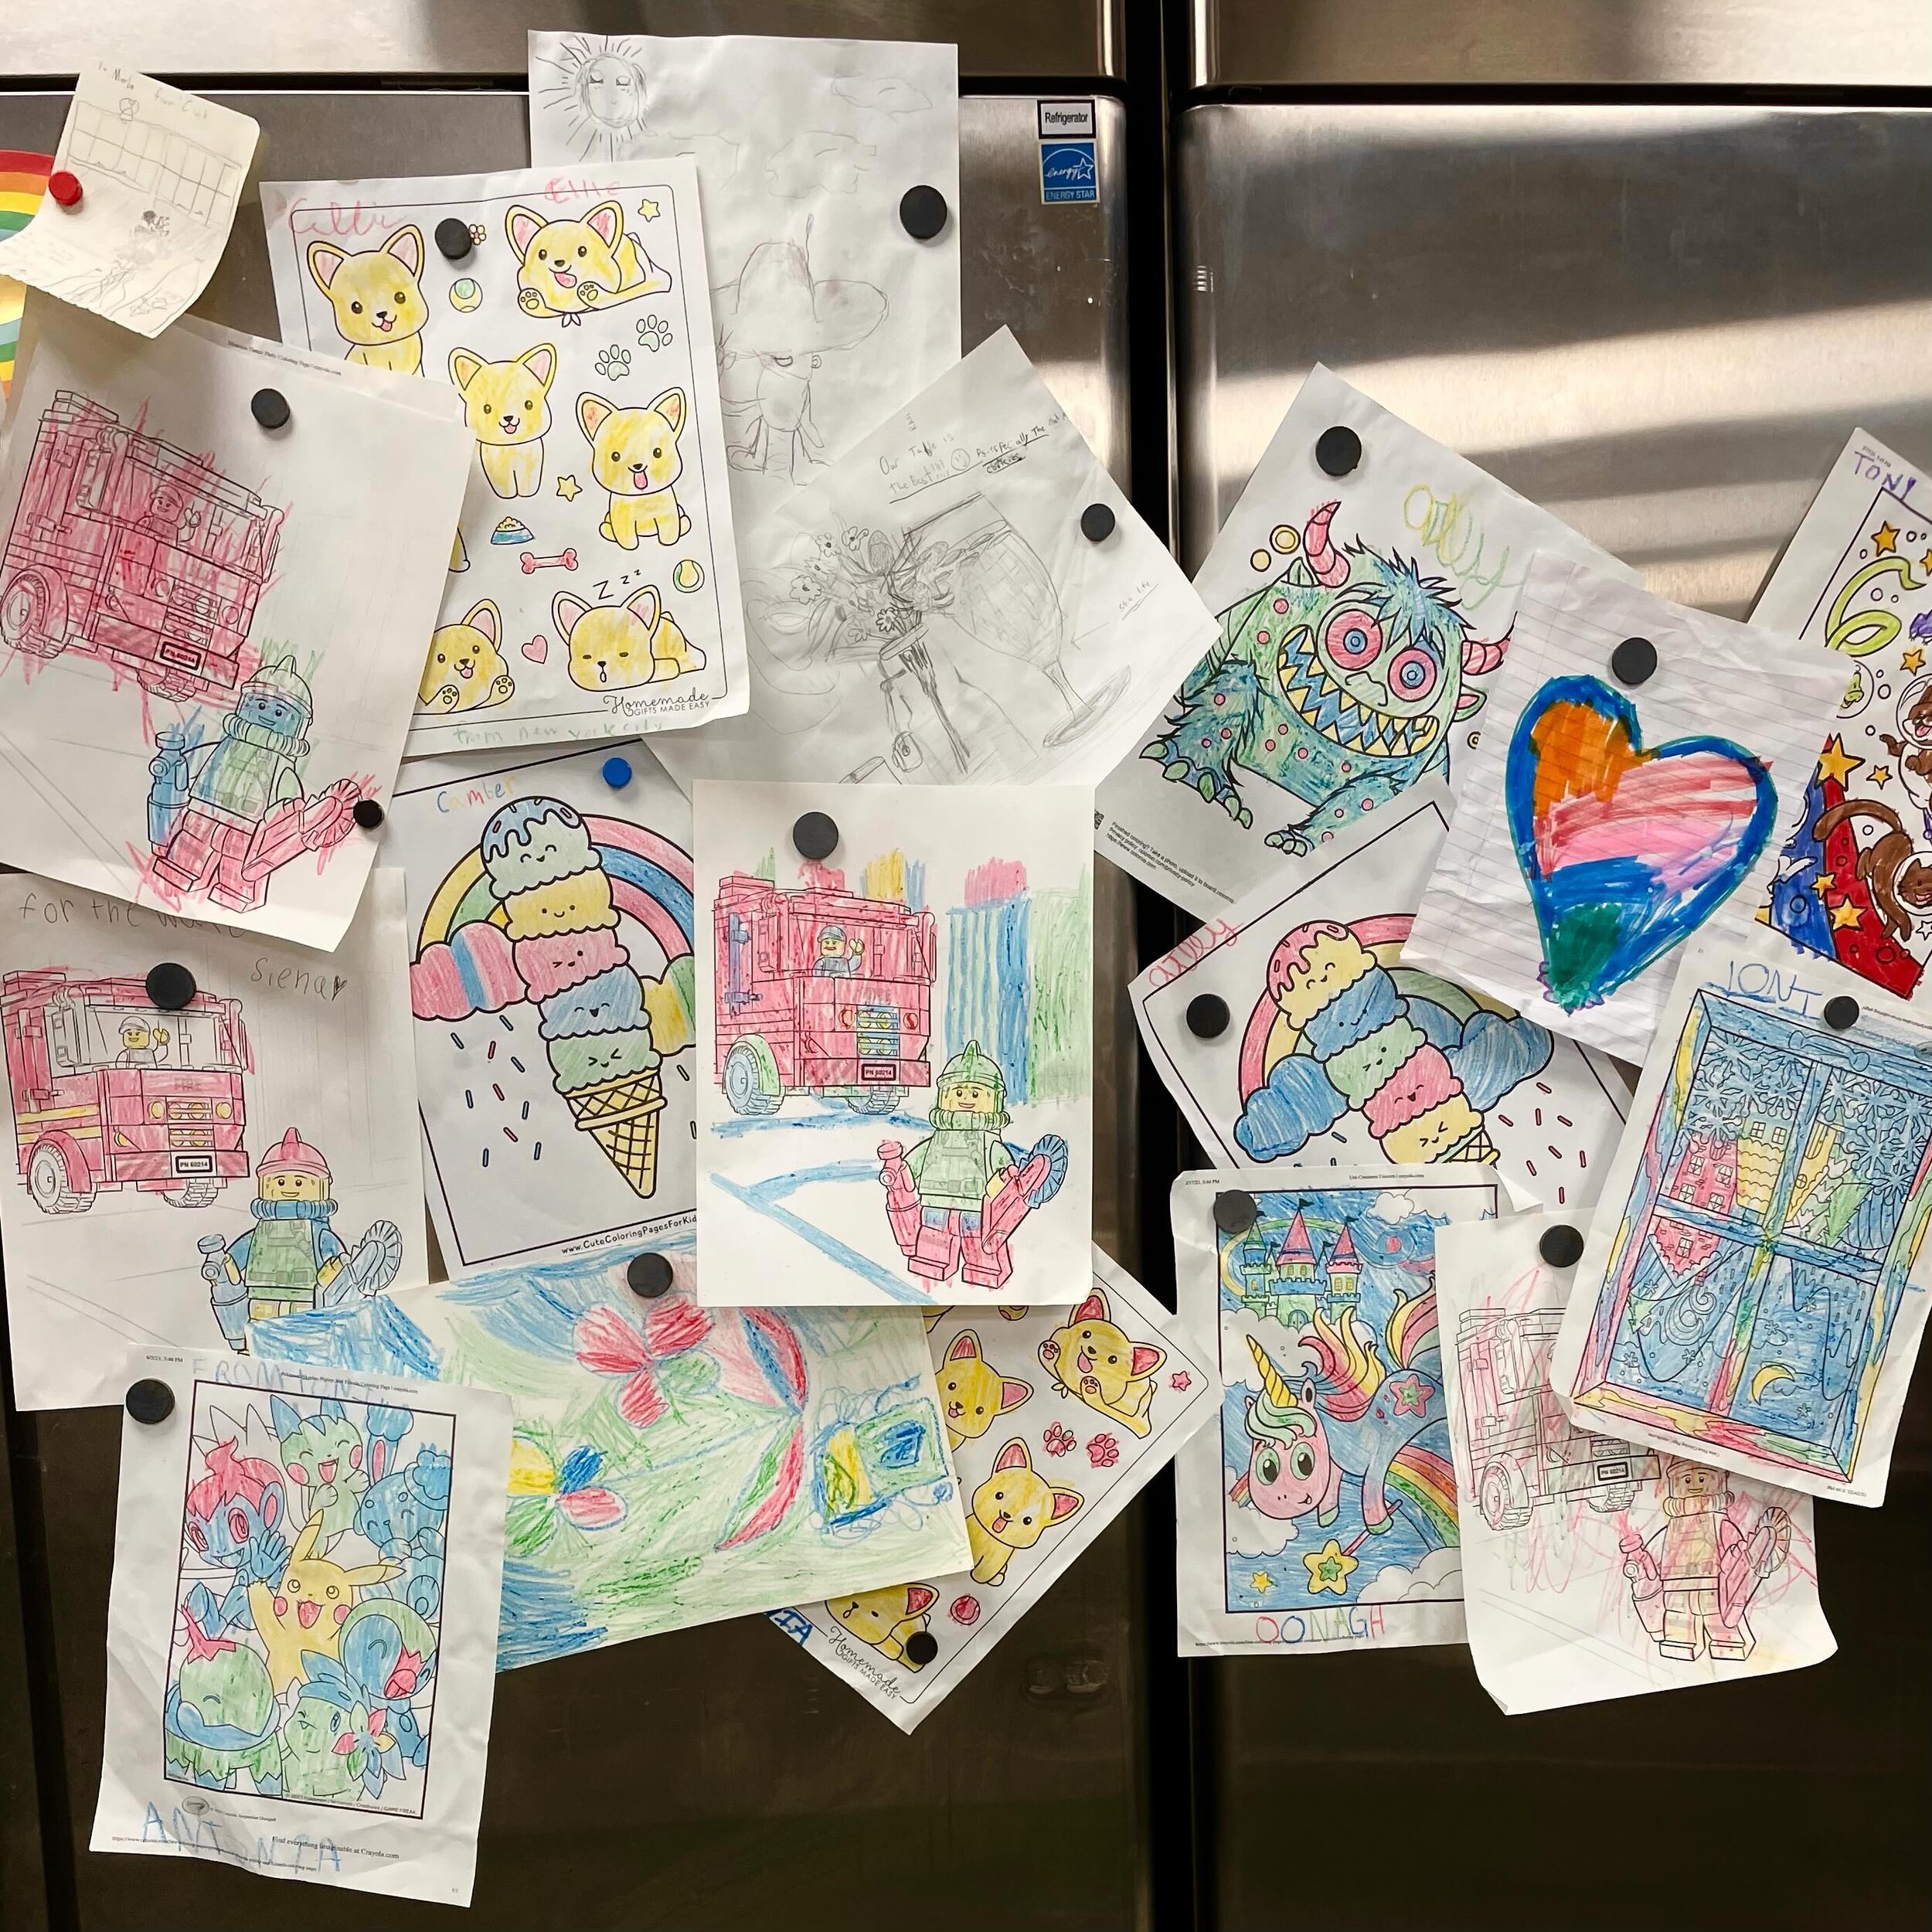 Thanks to all our young artists enjoying dinner with a crayon in hand, providing us with plenty of fridge-worthy art and loads of smiles! We&rsquo;ve got a great kids menu, too. Simply. Great. Food. for the whole family. Join us!